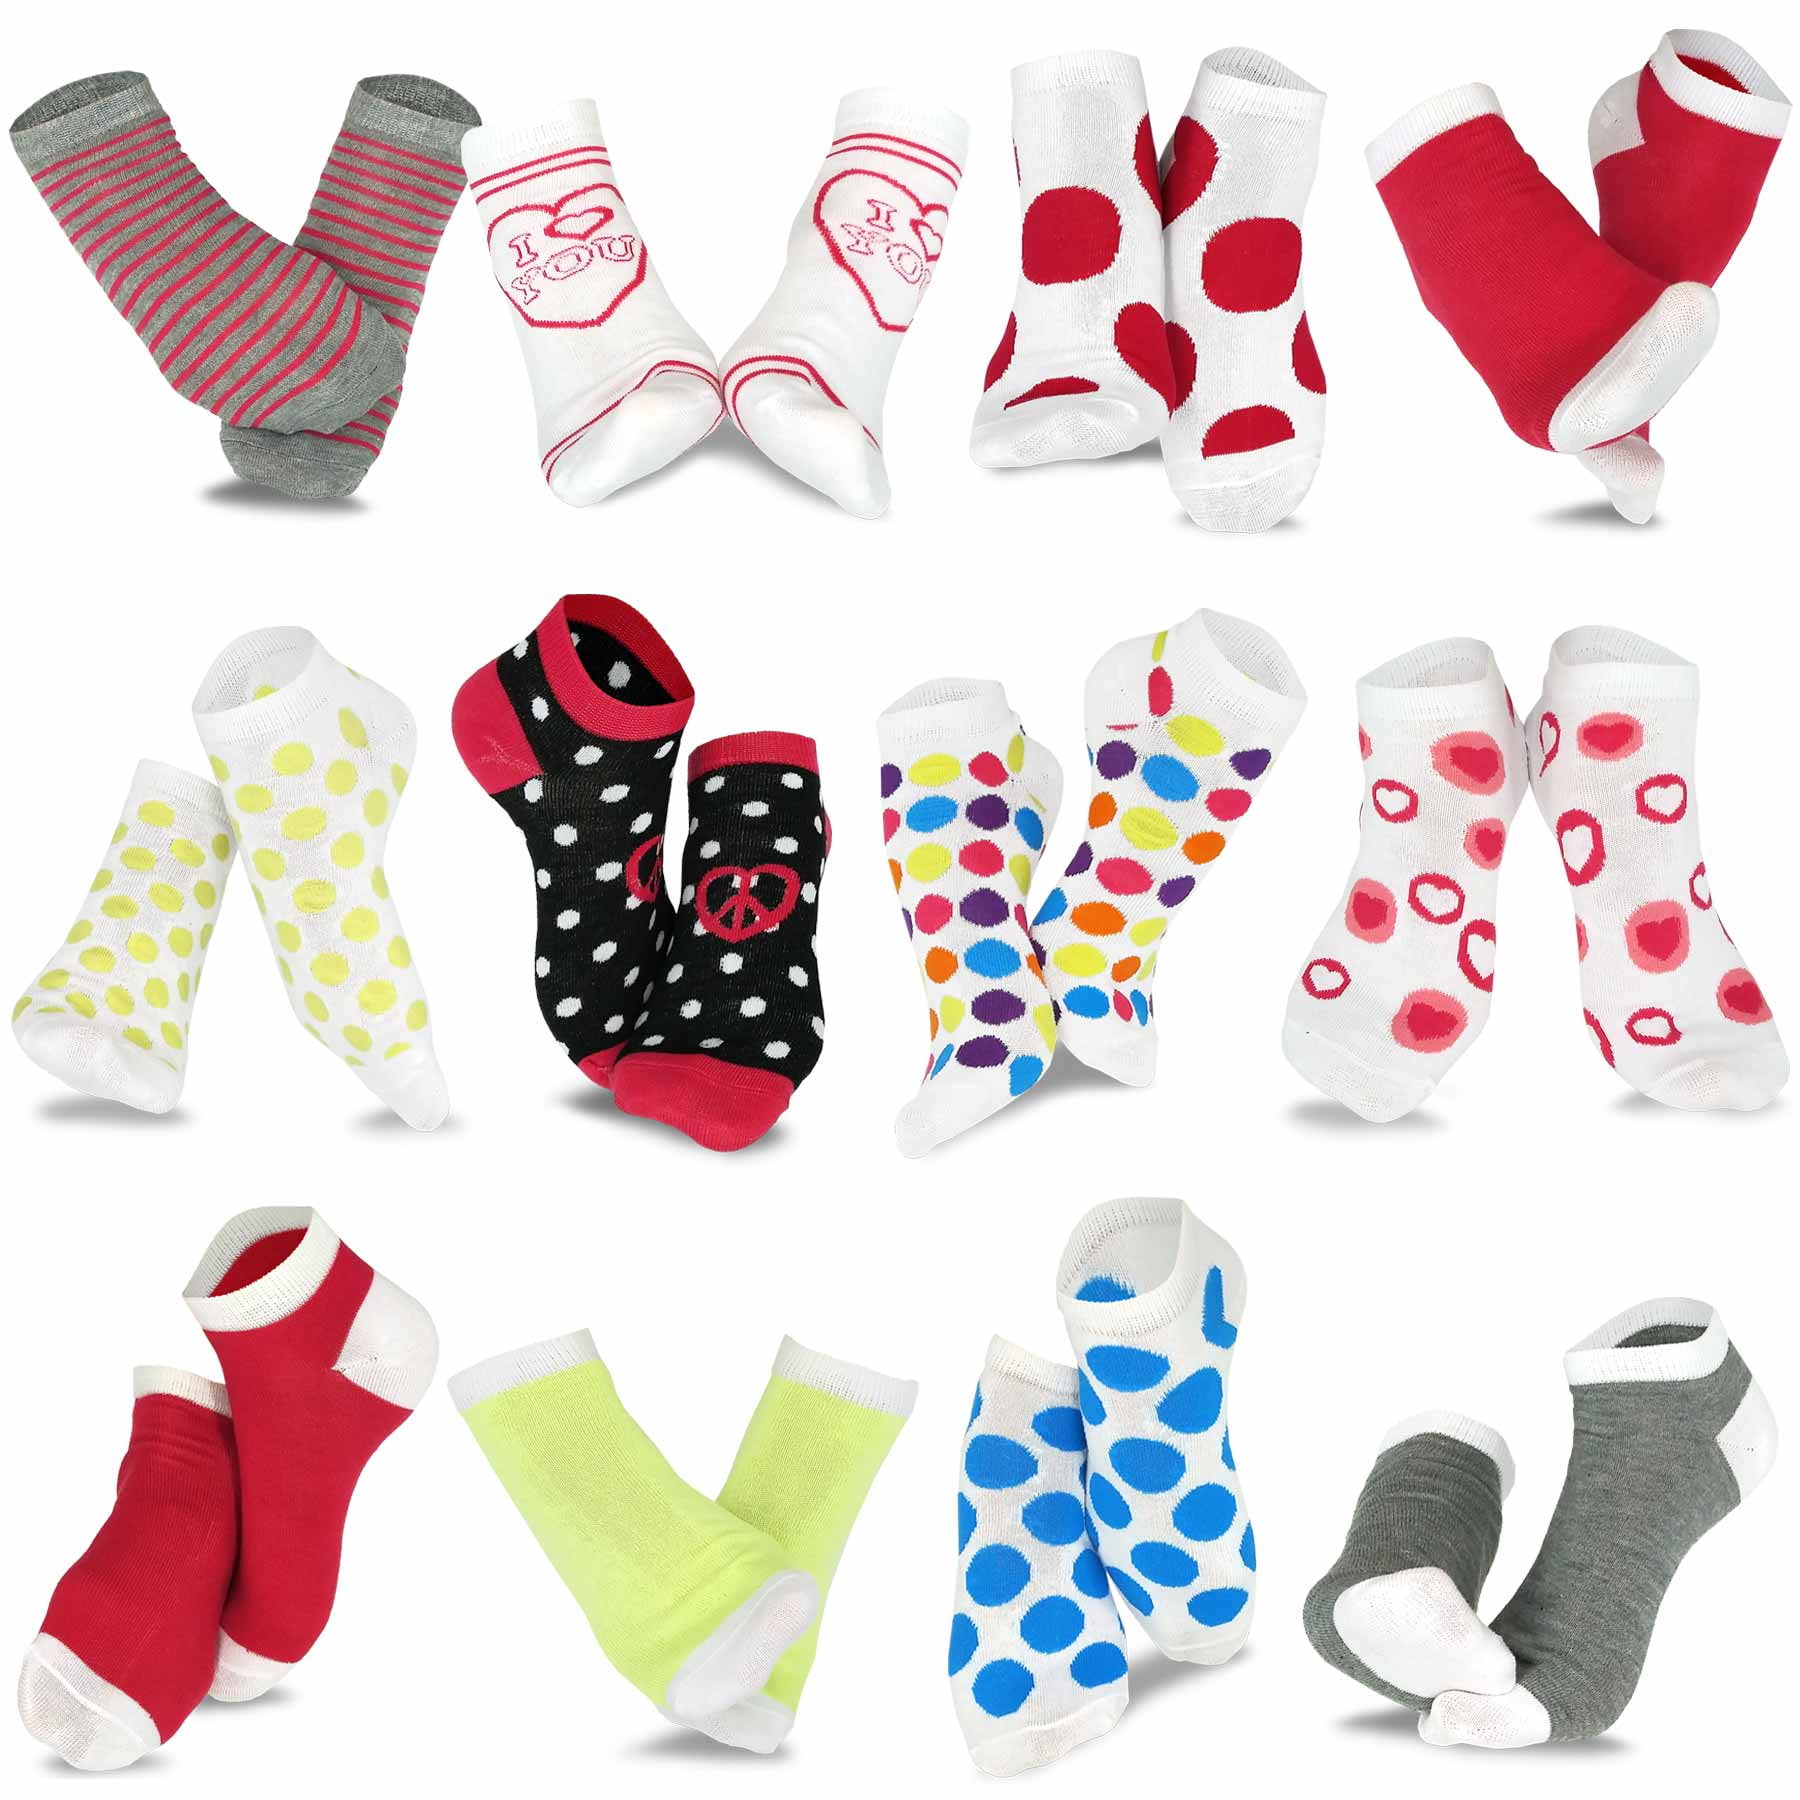  I Love Hungary Red Heart No Show Socks Athletic Ankle Sock  Printed Low Cut Socks for Men Women 5 Pairs : Sports & Outdoors